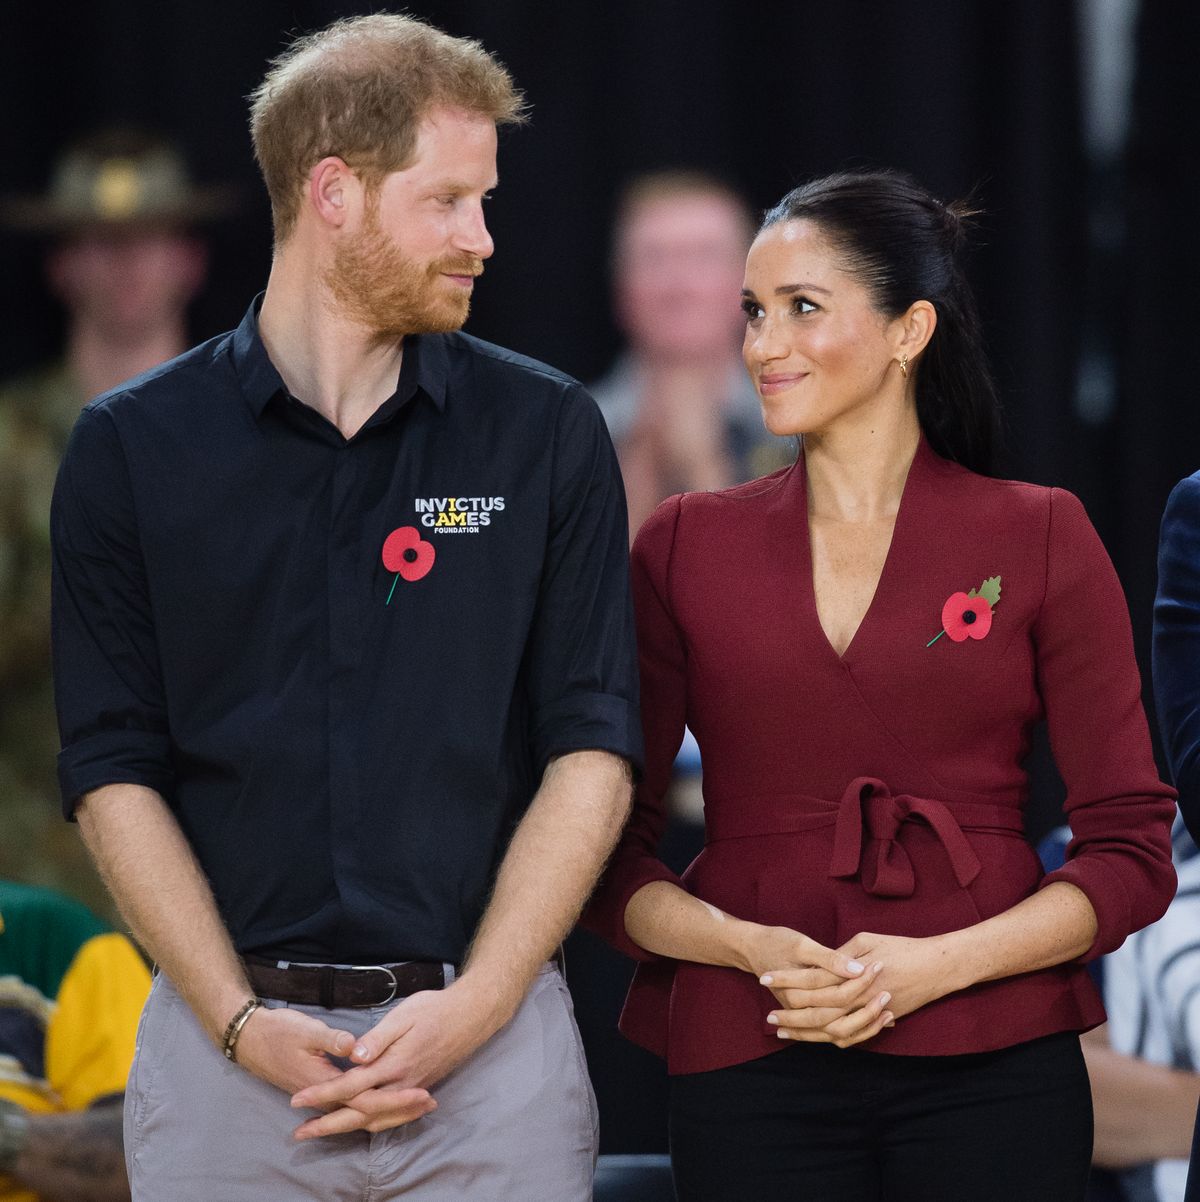 sydney, australia   october 27  prince harry, duke of sussex and meghan, duchess of sussex attend the wheelchair basketball final at the invictus games on october 27, 2018 in sydney, australia the duke and duchess of sussex are on their official 16 day autumn tour visiting cities in australia, fiji, tonga and new zealand  photo by samir husseinsamir husseinwireimage